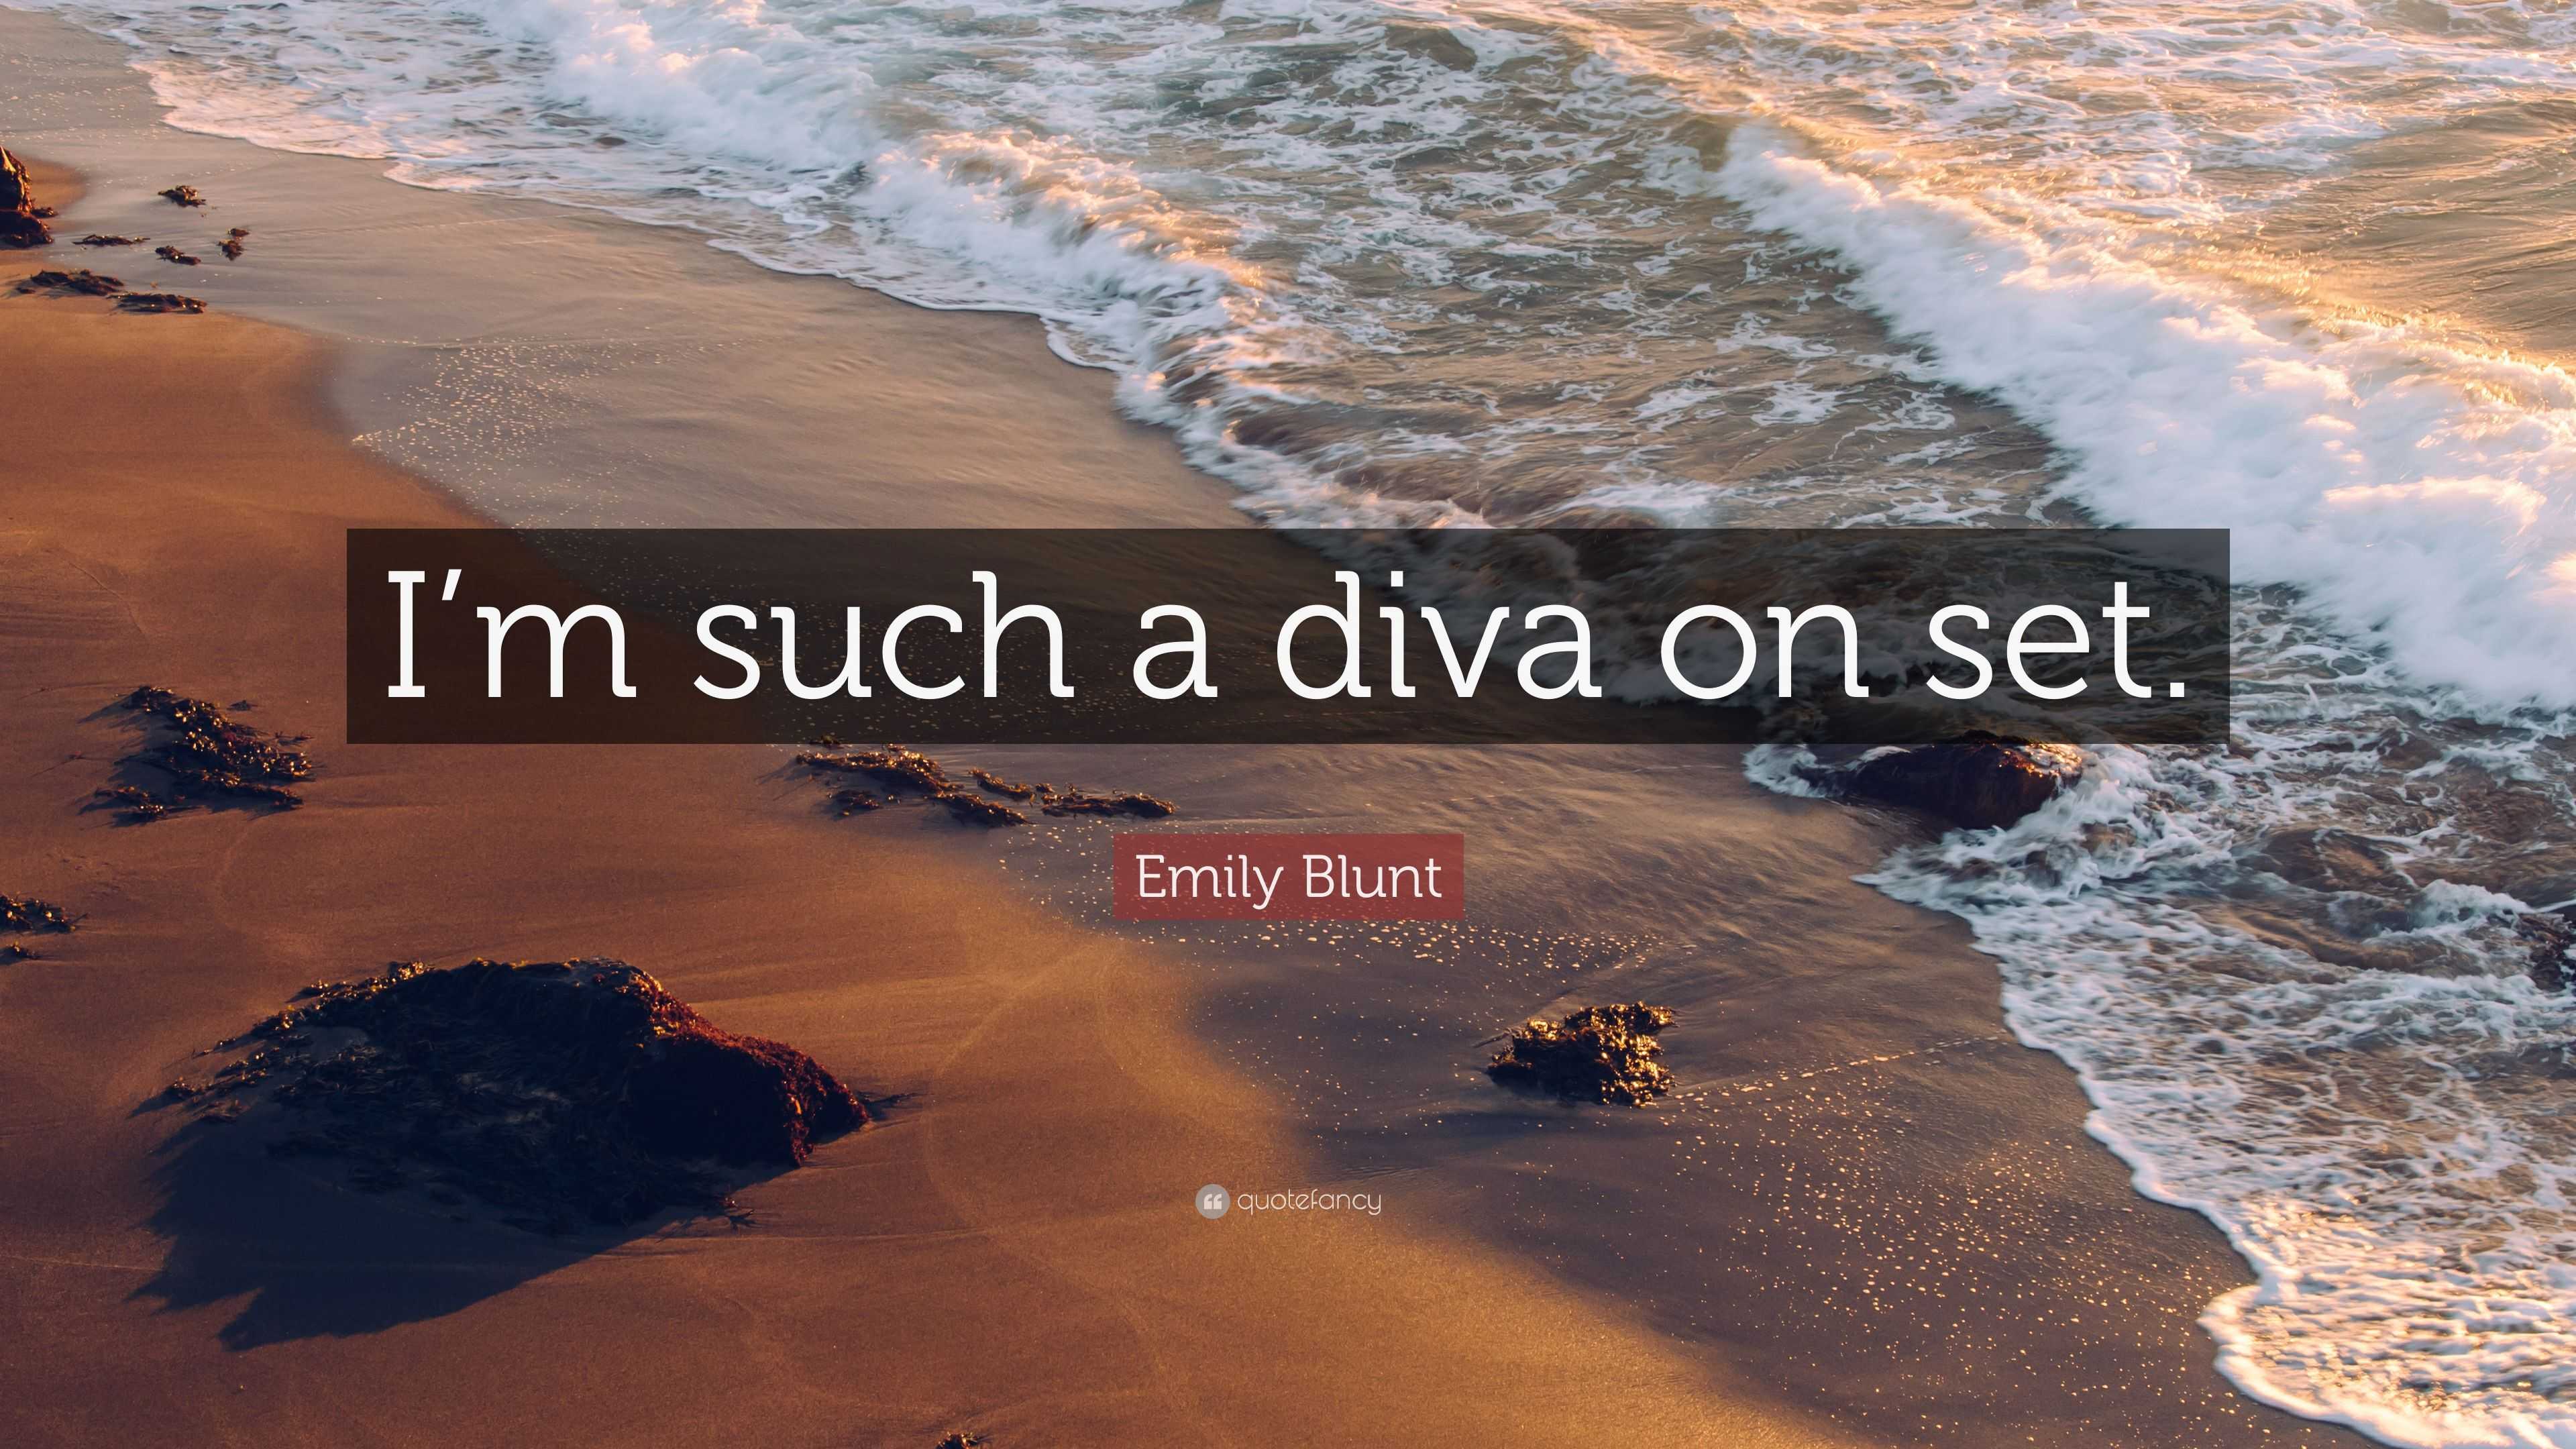 Emily Blunt Quote: “I'm such a diva on